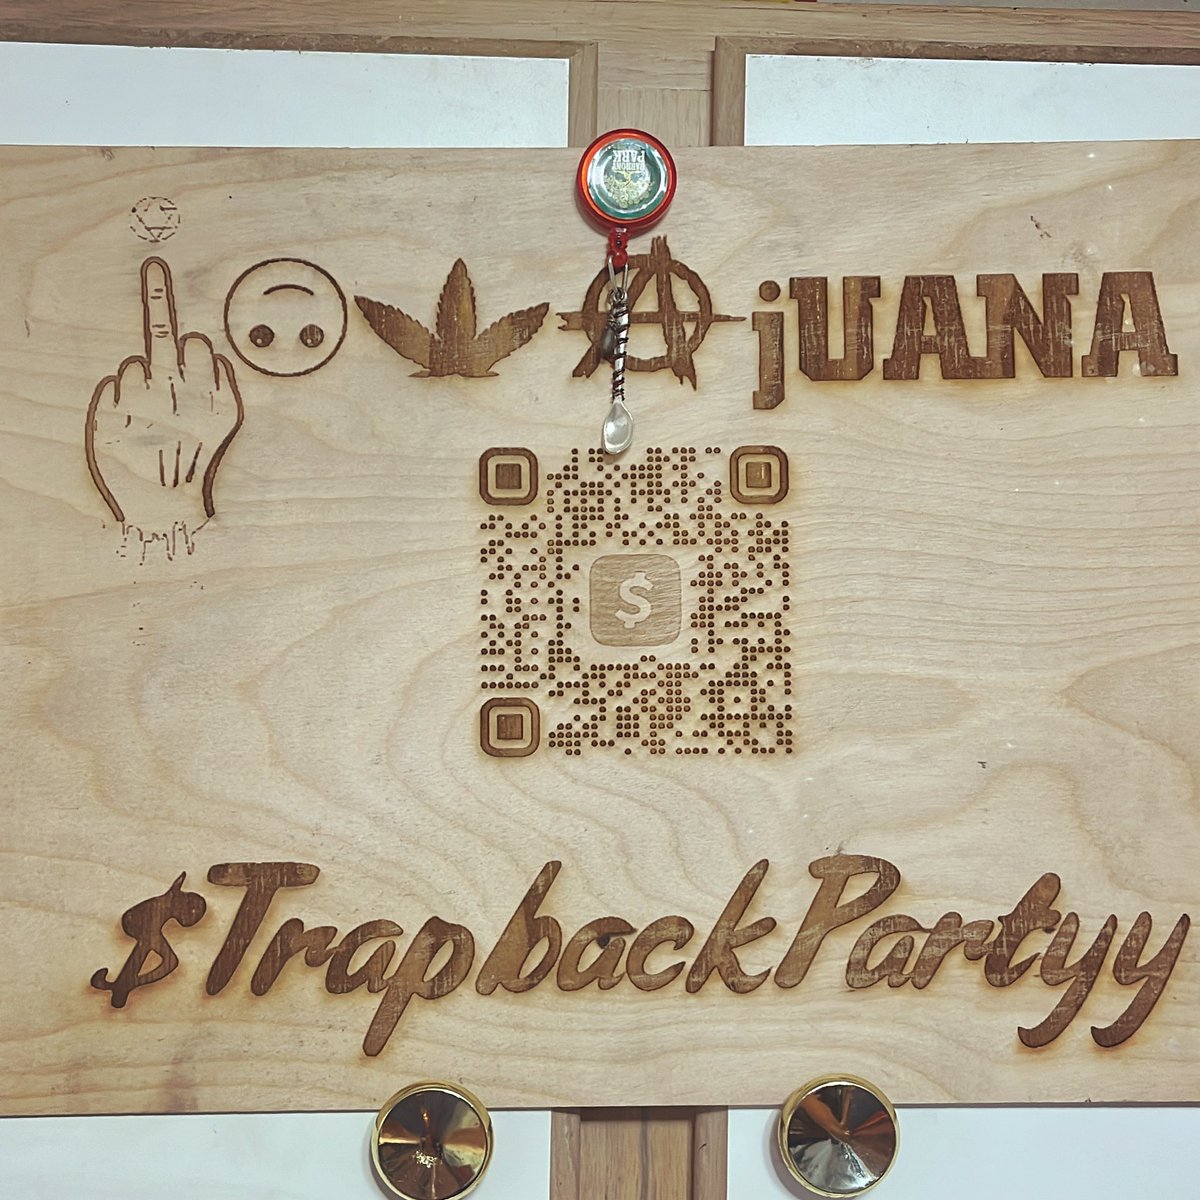 an order of 35 shirts or more from “Affiliate Apparel”@iOWAScreenPrint 

gets you one of these for your #brand time to #turnup #iOWA with 
wood 🪵 engraving by @Urbanowlmusic yo!   #custommade #custombranding 
you do you right with U$